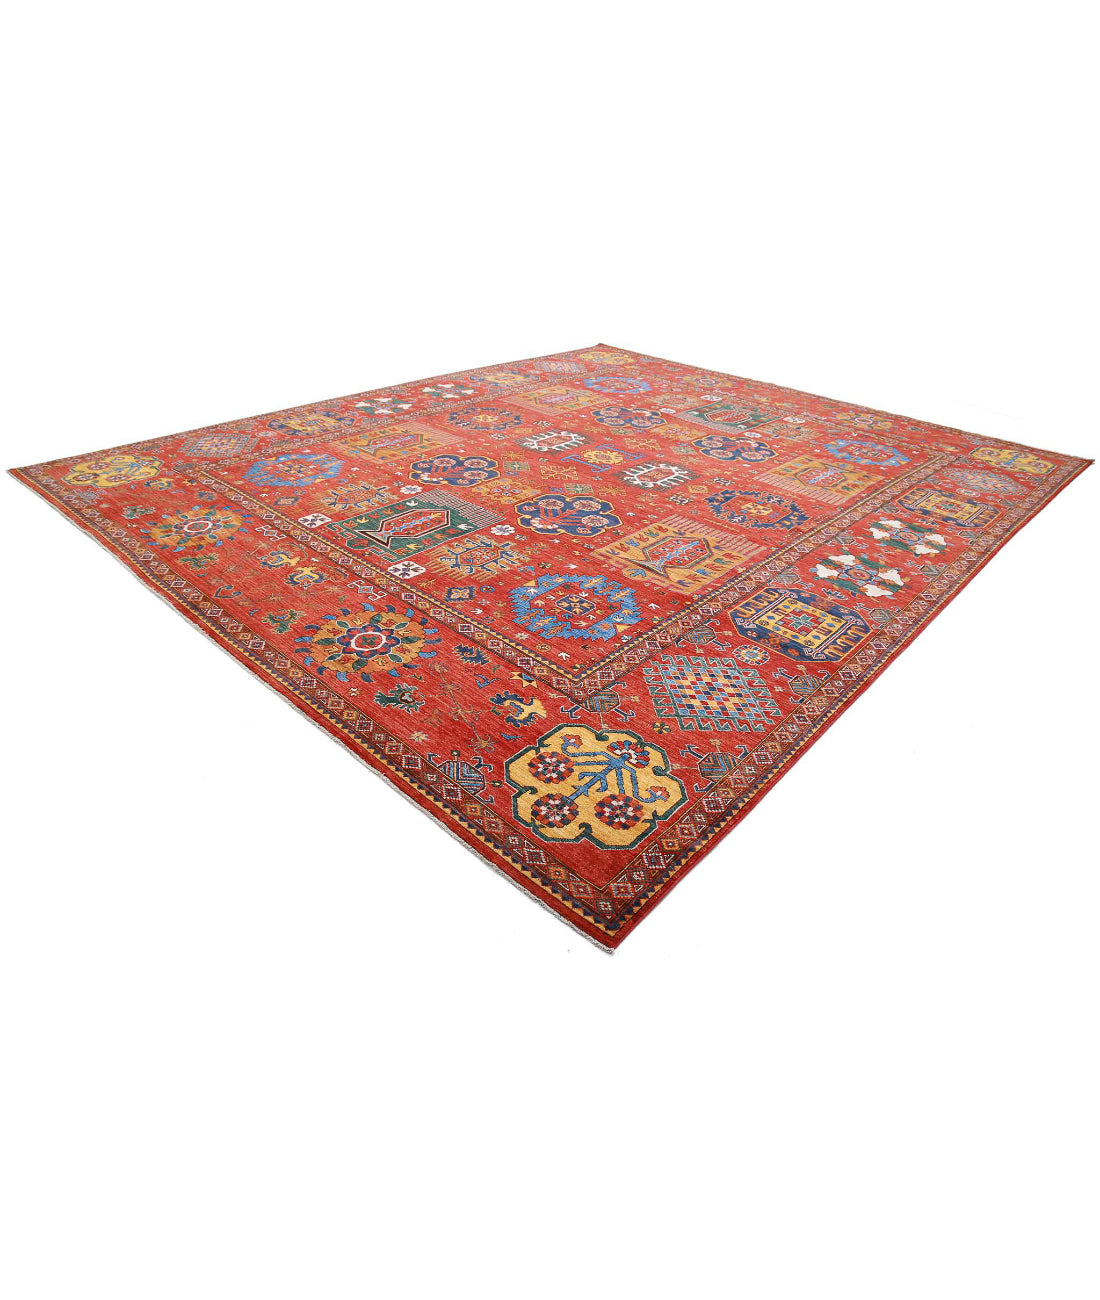 Hand Knotted Nomadic Caucasian Humna Wool Rug - 13'6'' x 16'3'' 13'6'' x 16'3'' (405 X 488) / Red / Red